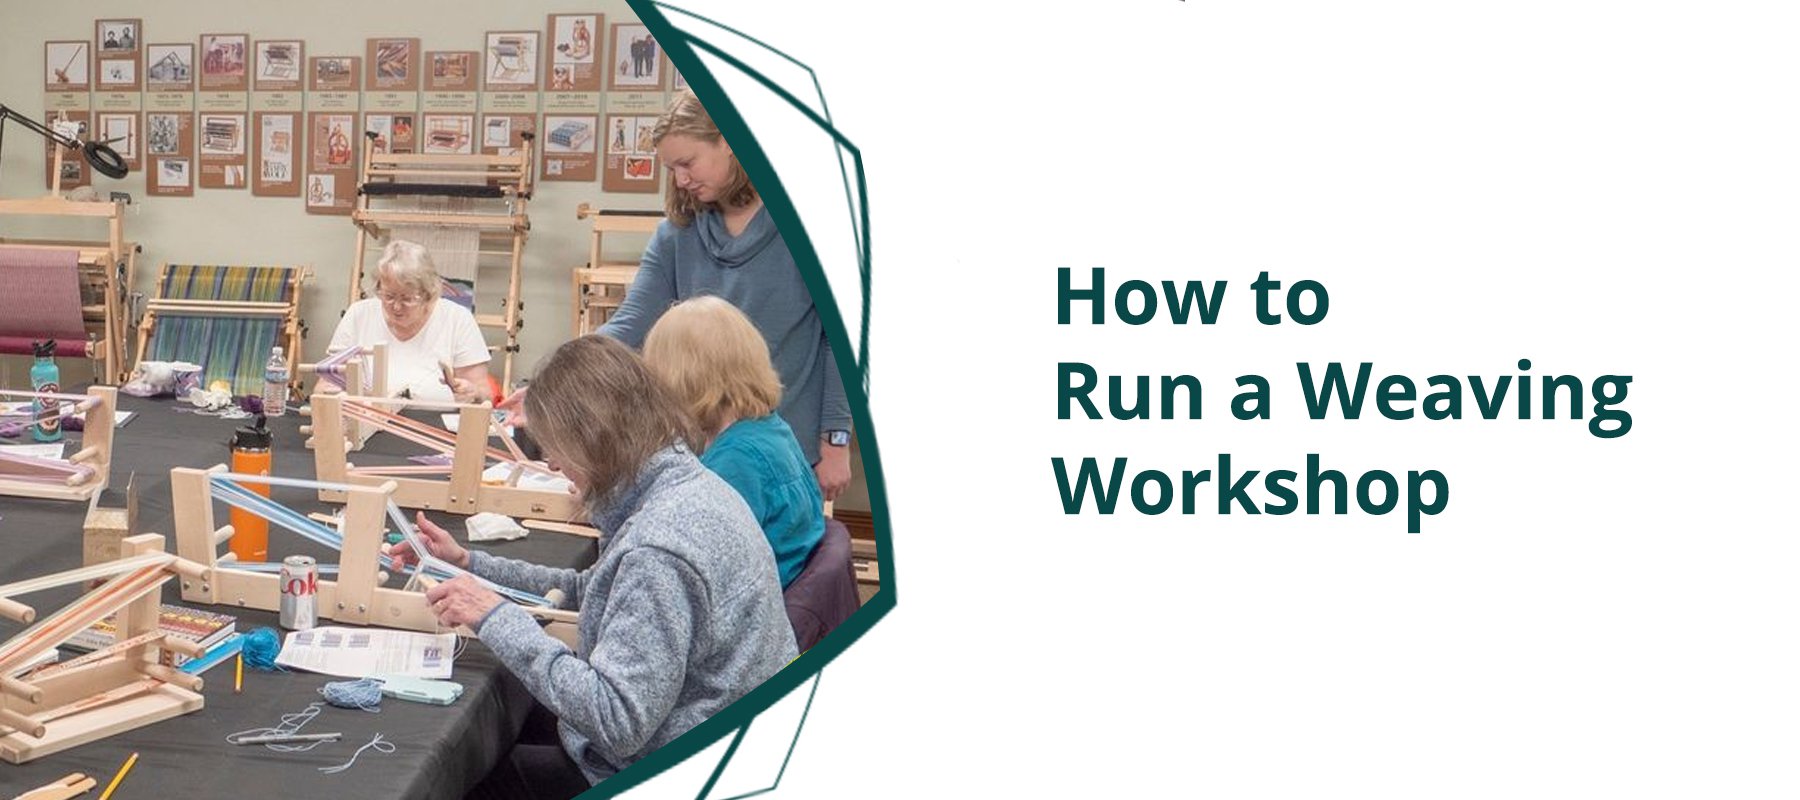 How to Run a Weaving Workshop: A Hands-On Approach to Learning